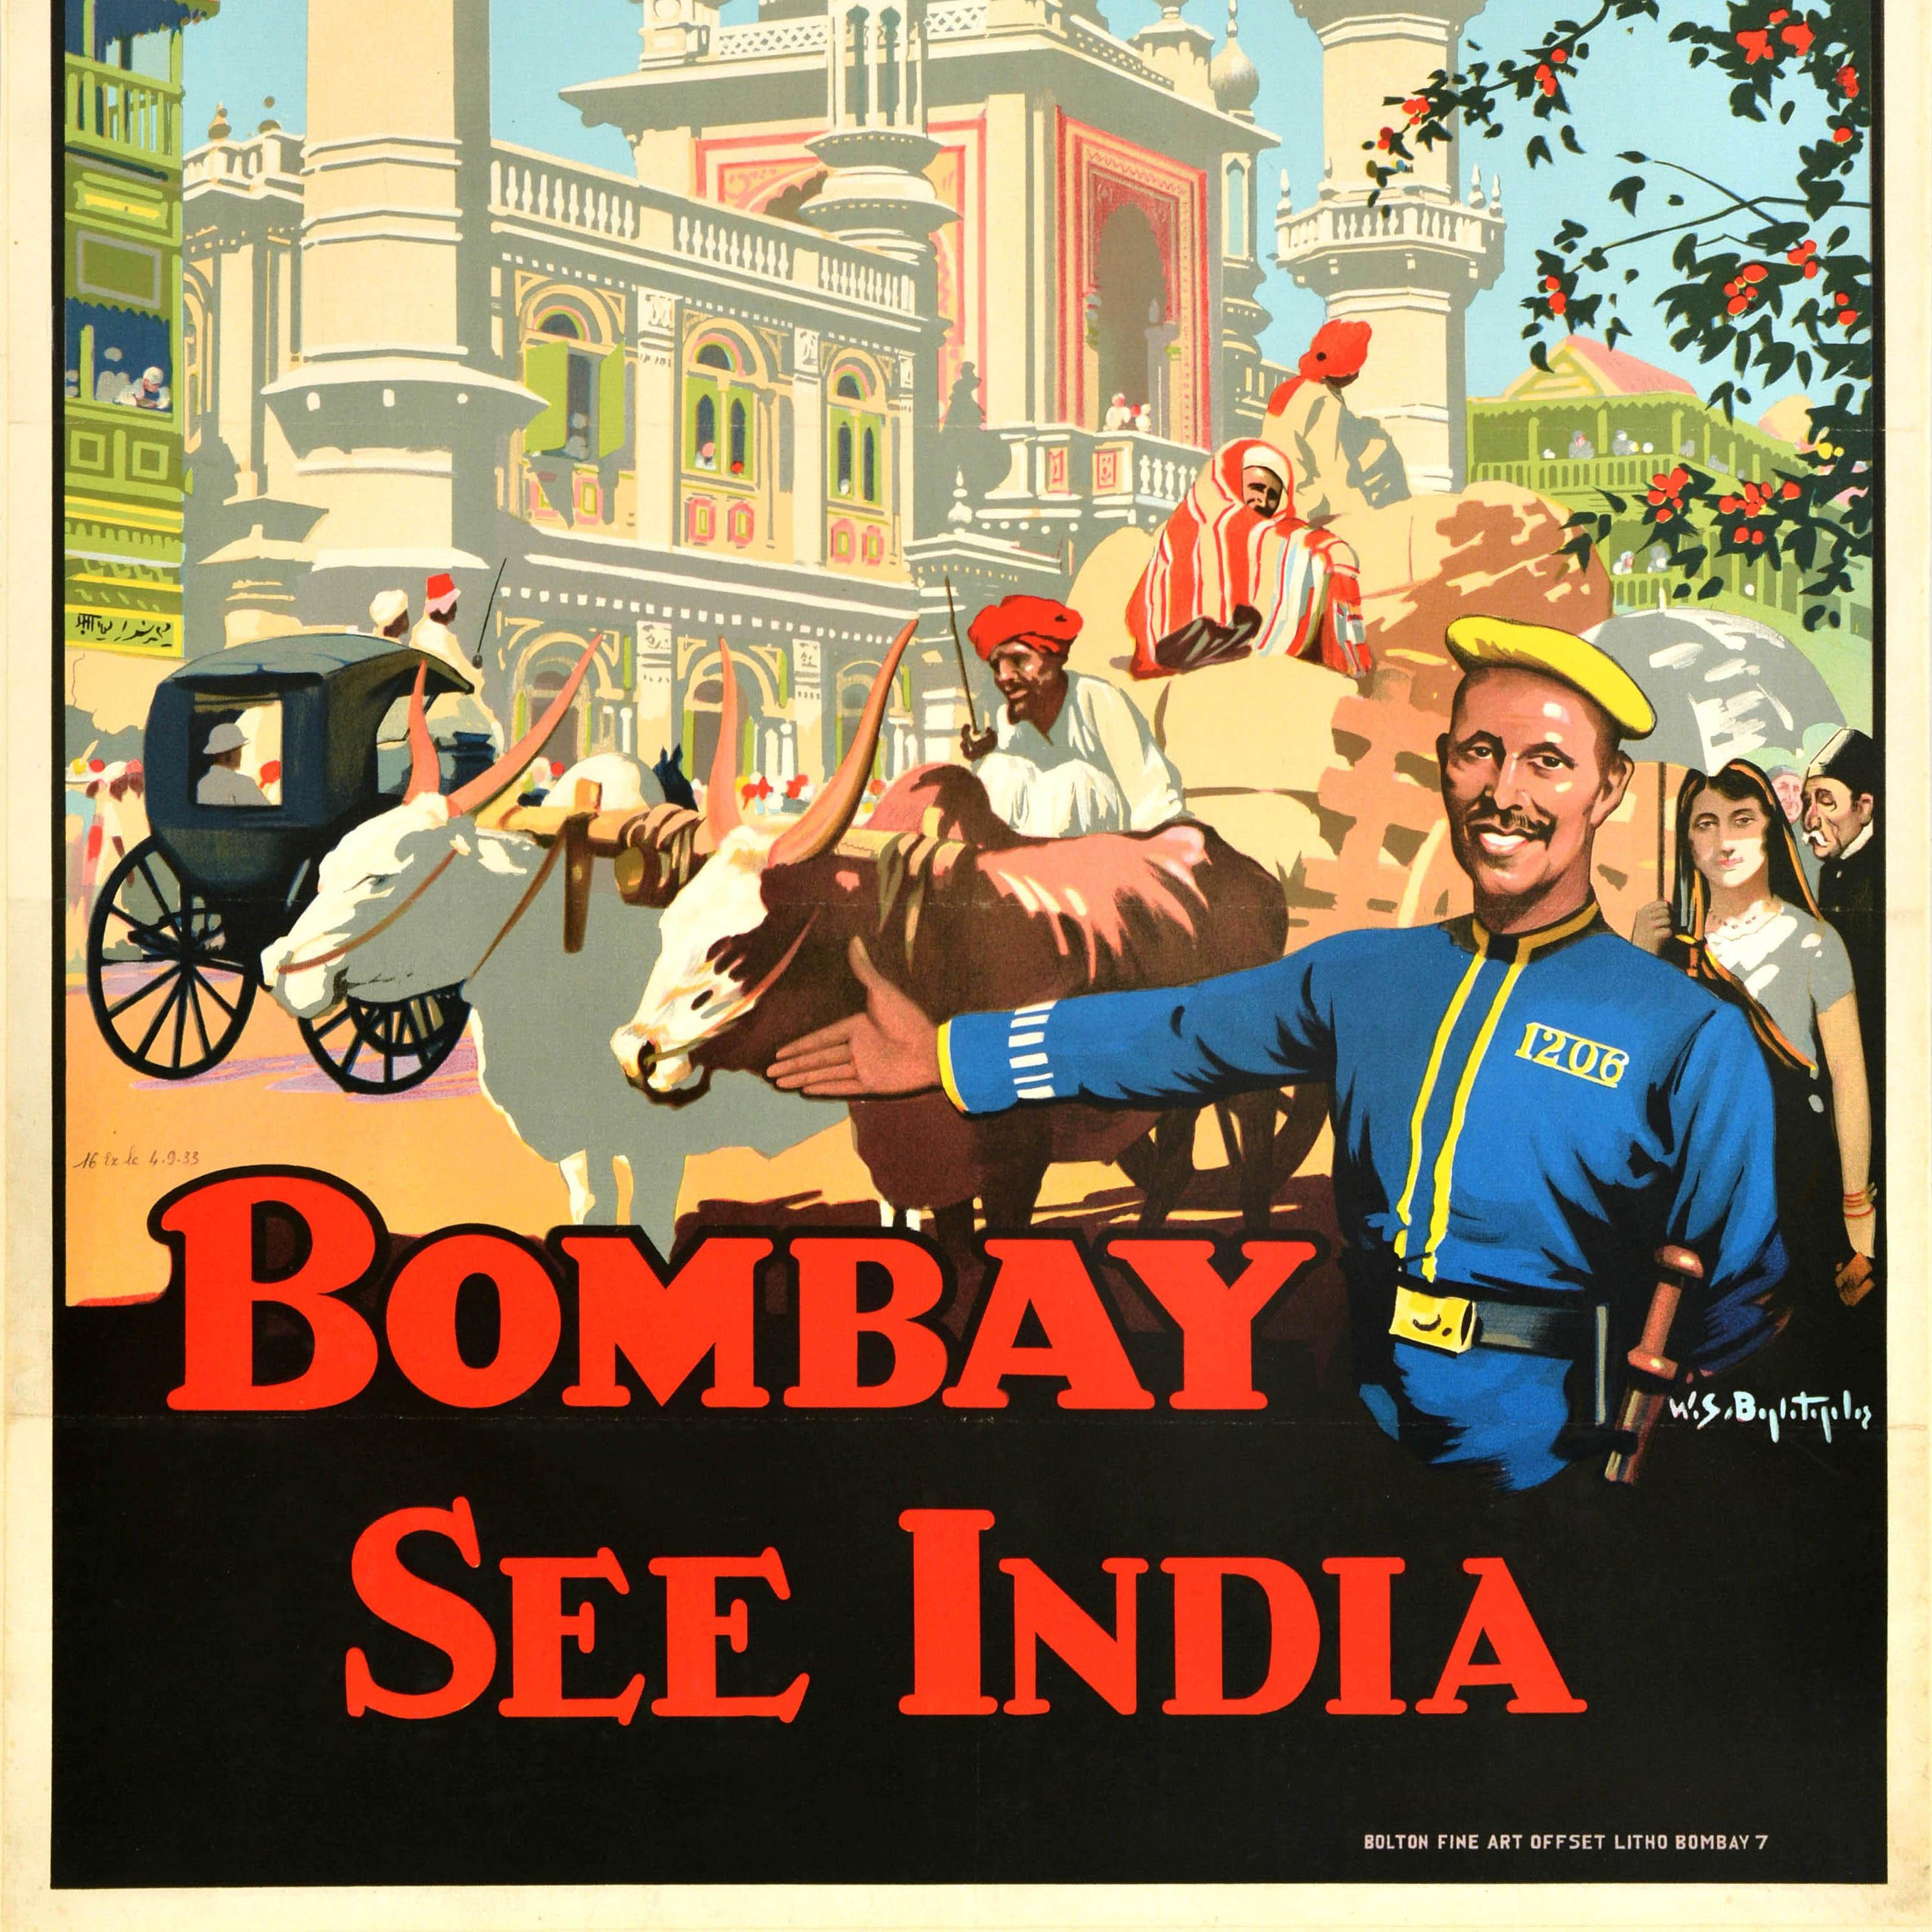 Original vintage travel poster - Bombay See India - featuring a great design showing men riding on an ox cart, people walking on the busy street and a horse drawn carriage in front of an old temple building with a dome and towers, the bold text in